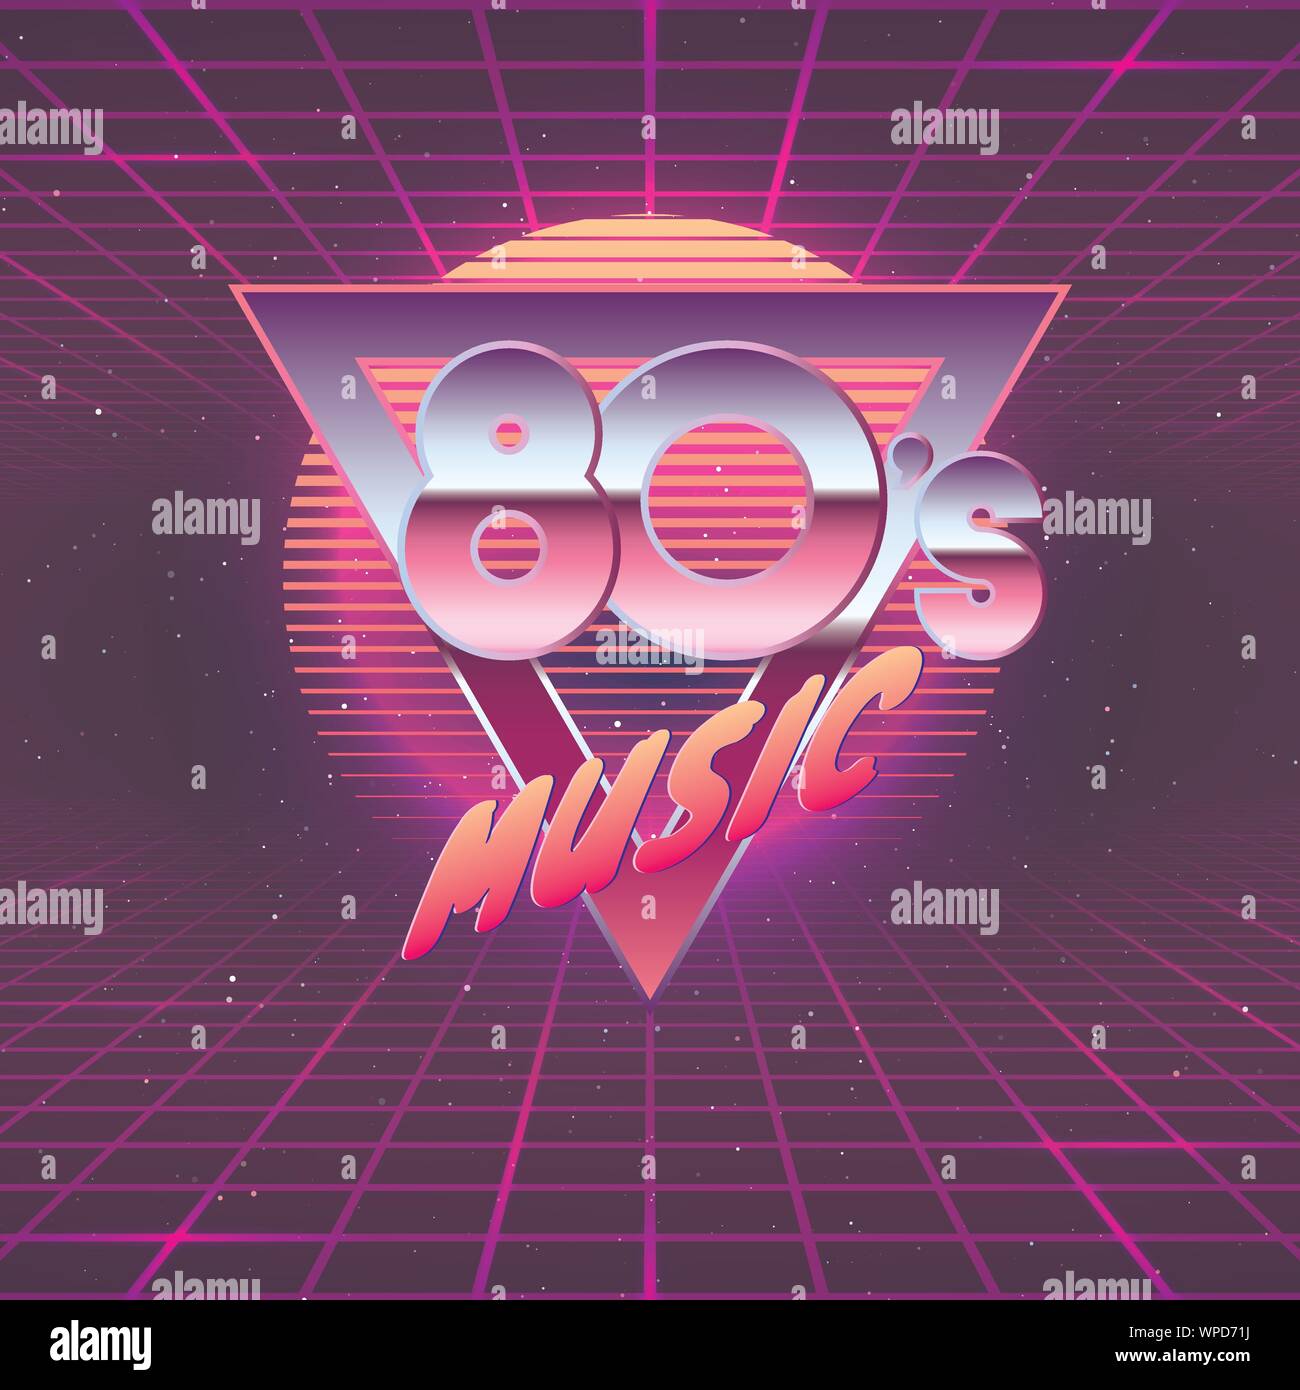 Paster template for retro party 80s. Neon colors. Vintage electronic music flyer. Vector illustration Stock Vector